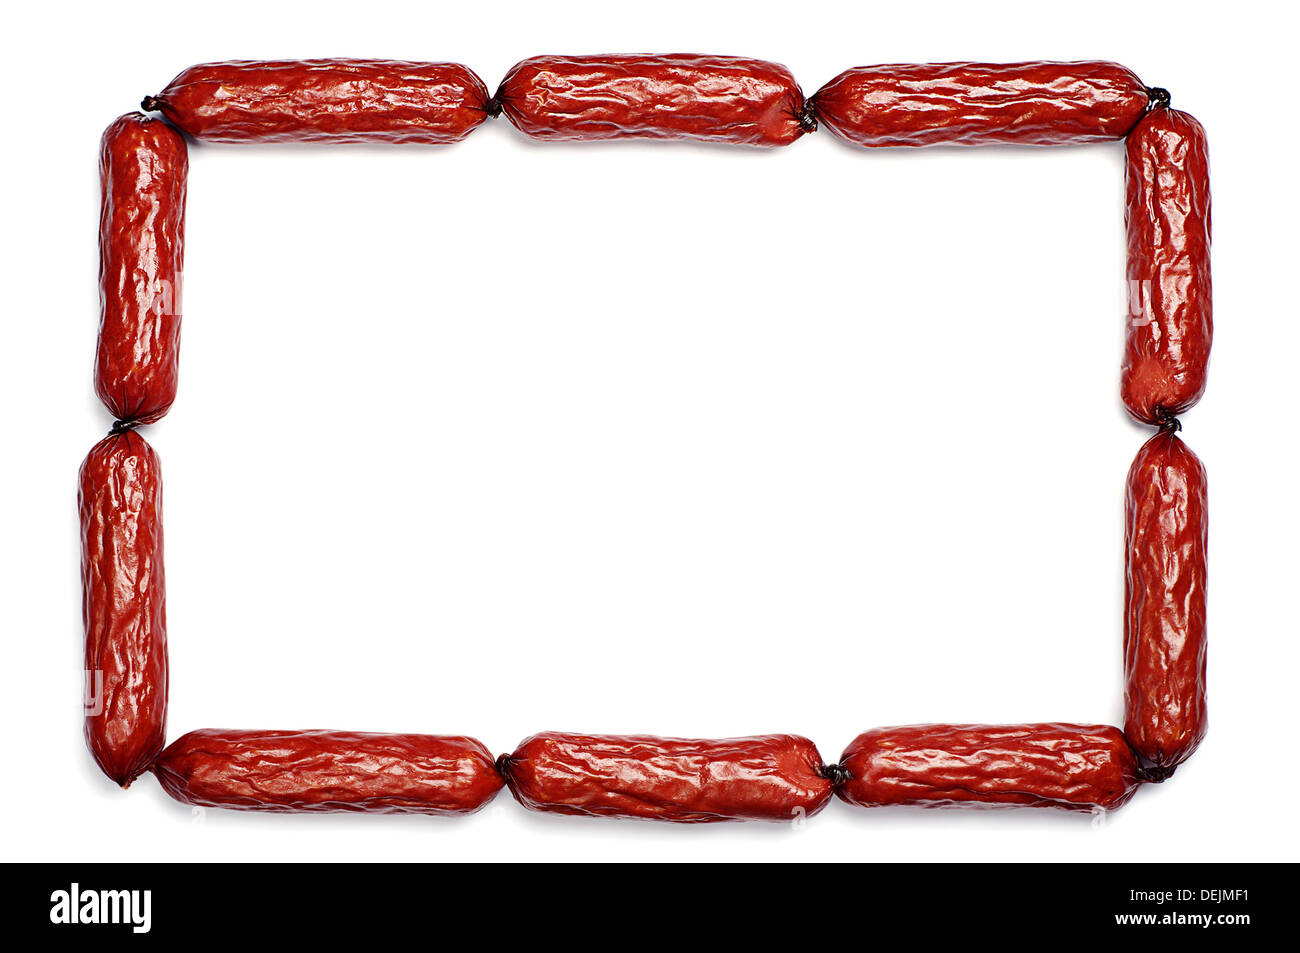 Frame of the small smoked sausages on a white background Stock Photo